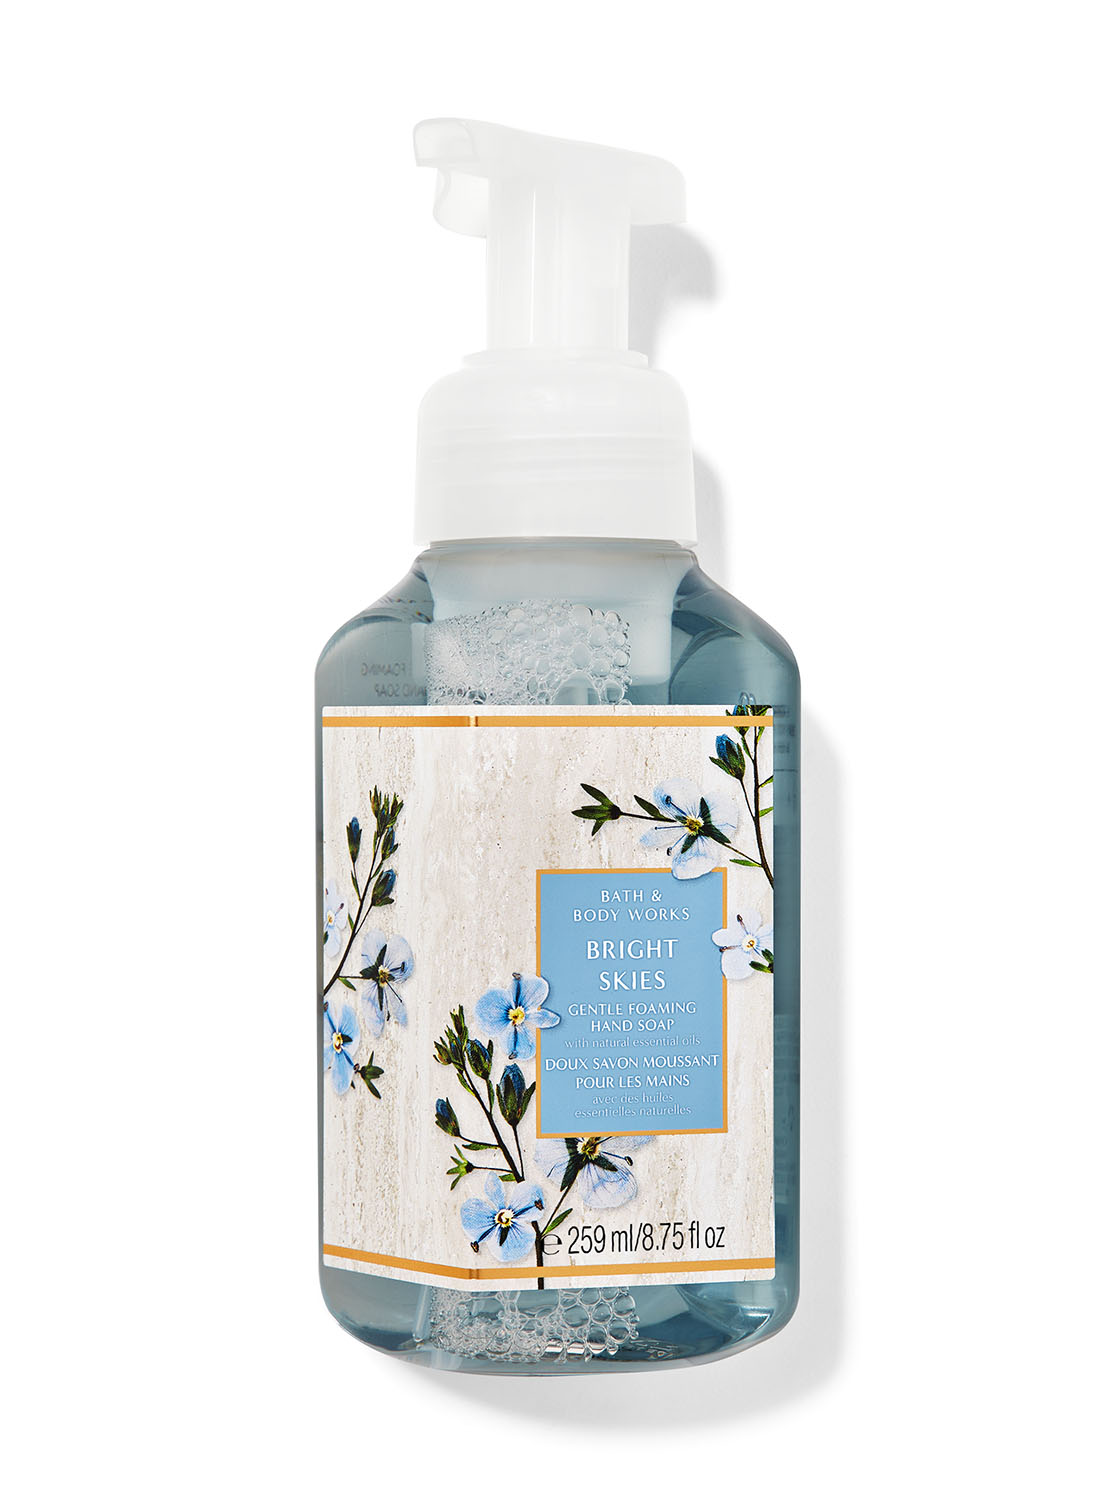 Bright Skies Gentle Foaming Hand Soap | Bath and Body Works